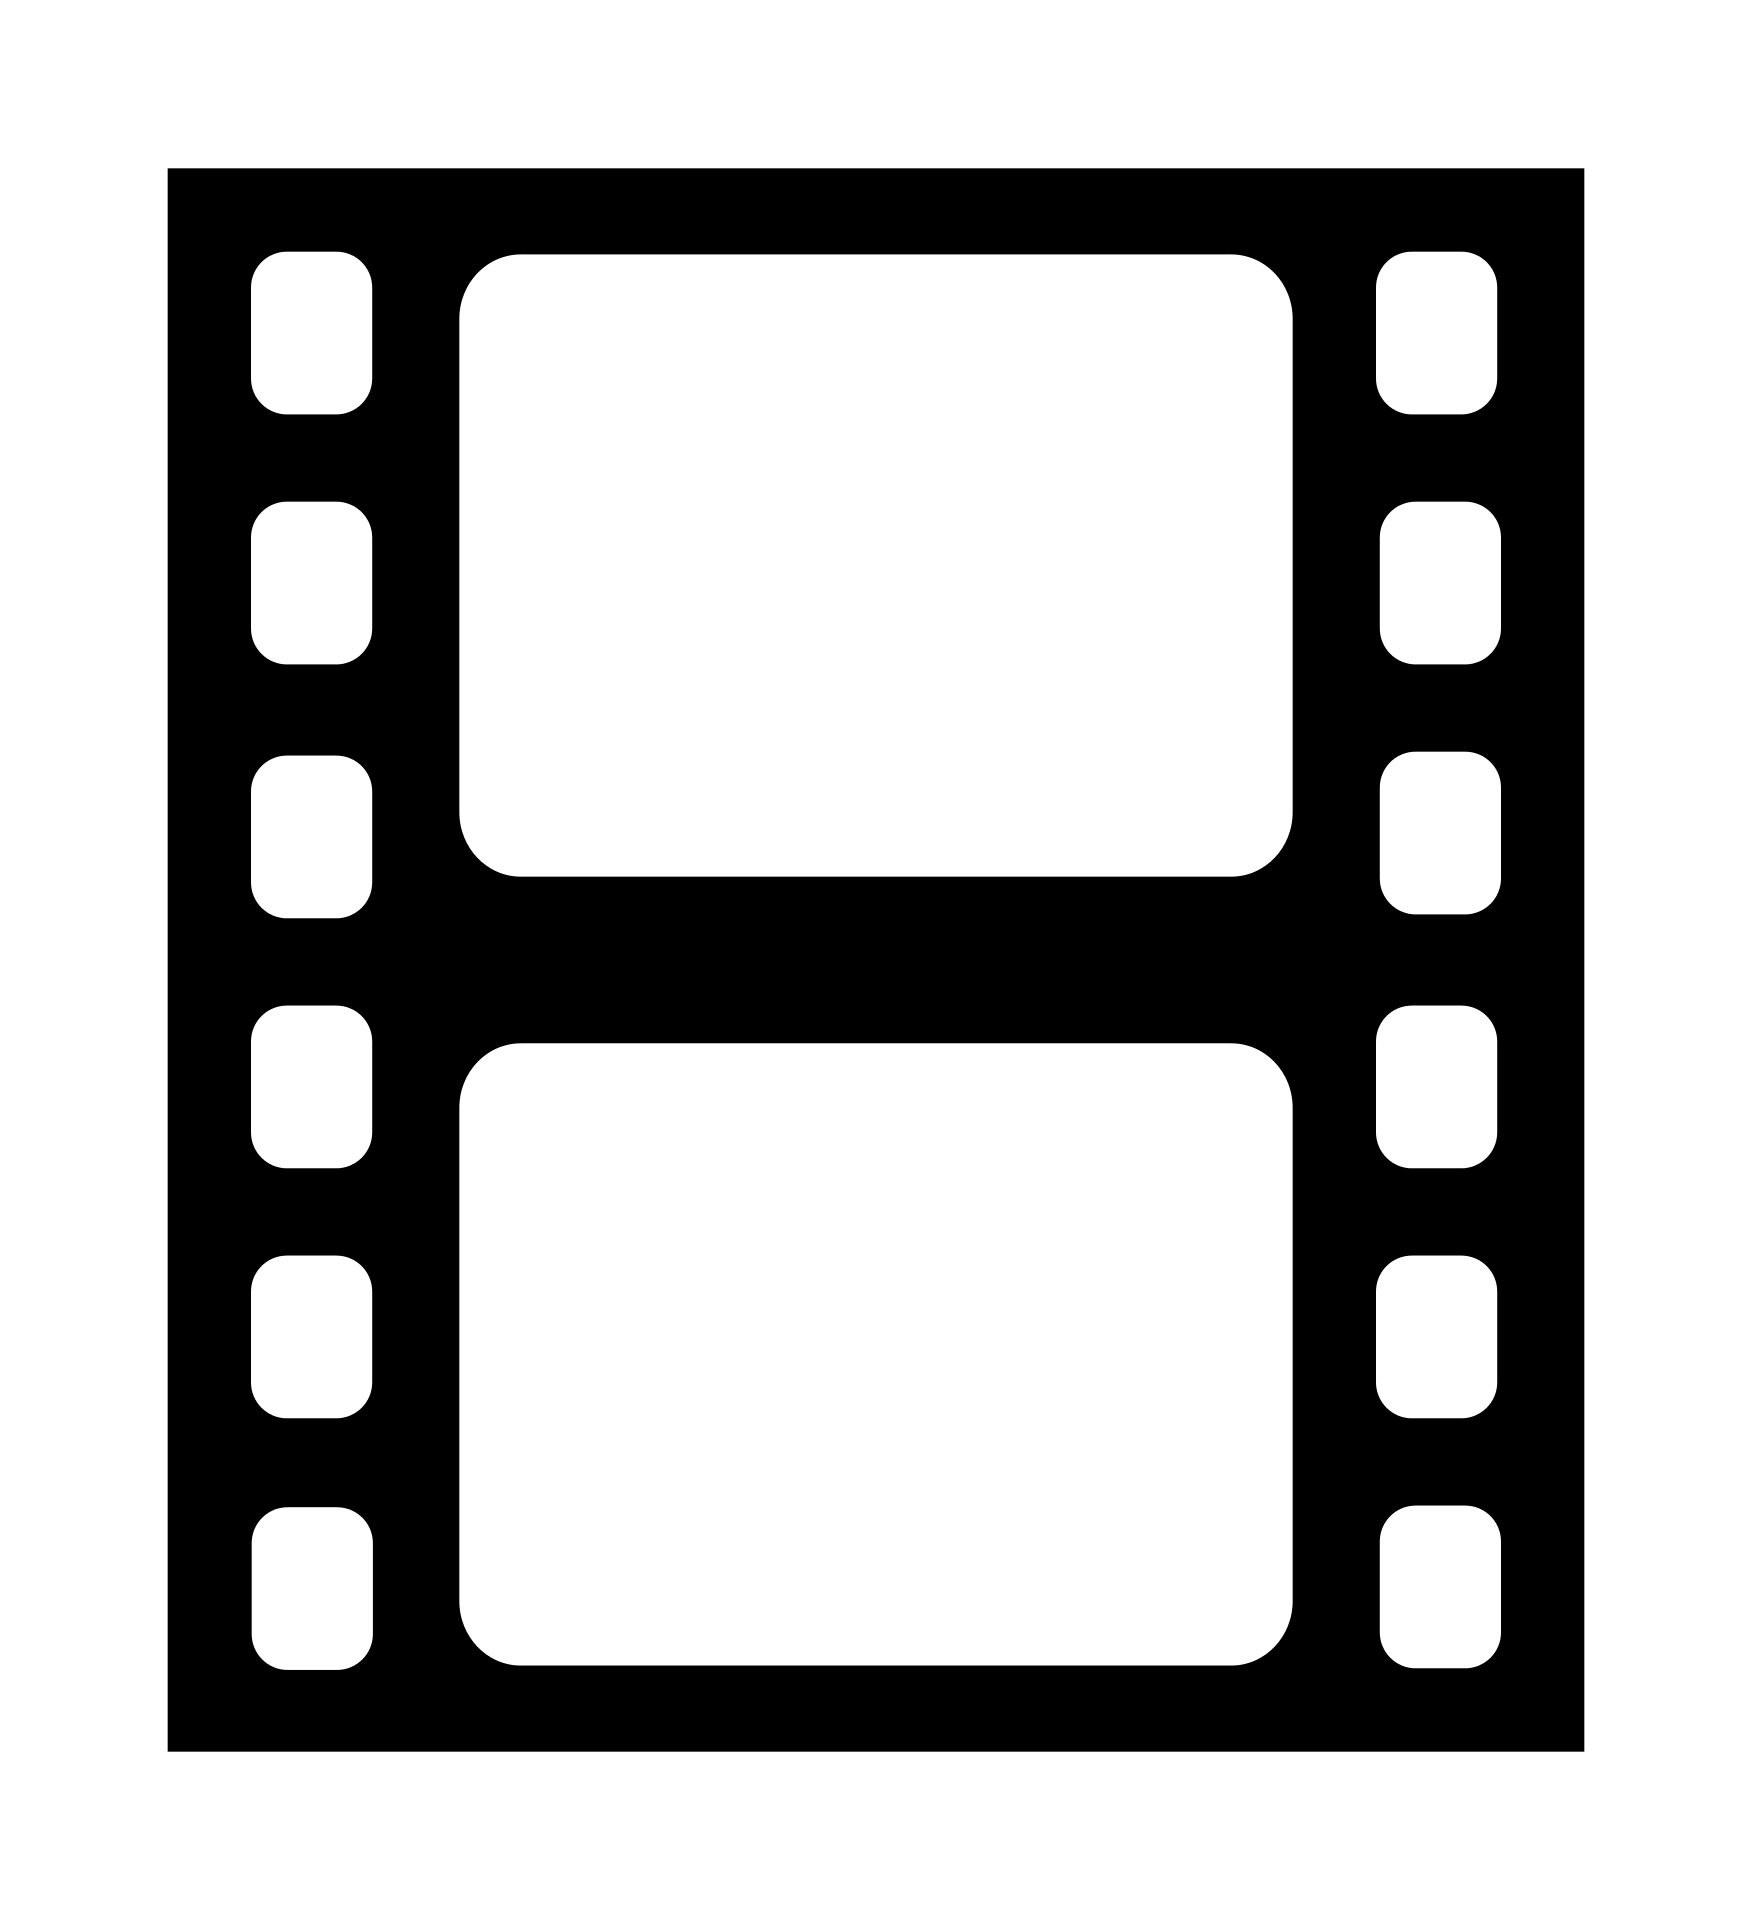 Watch Movie Icon at Vectorified.com | Collection of Watch Movie Icon ...